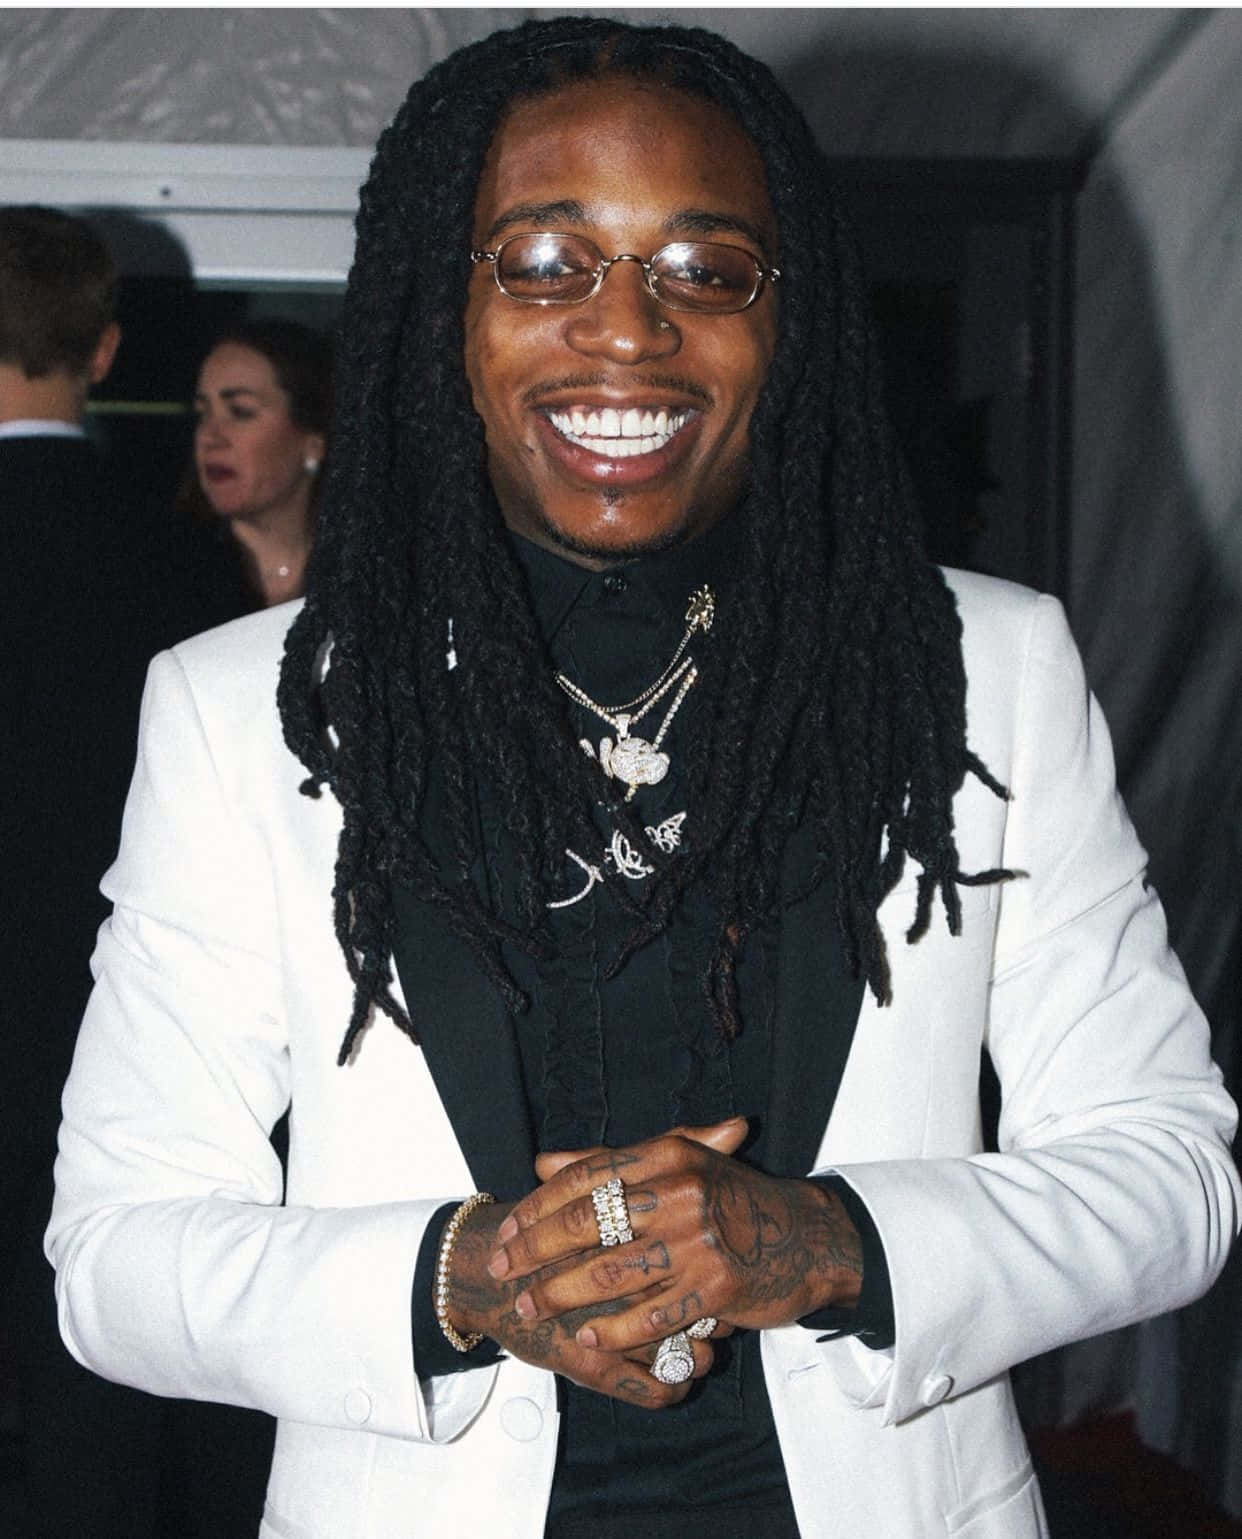 Jacquees Balack And White Tuxedo Wallpaper